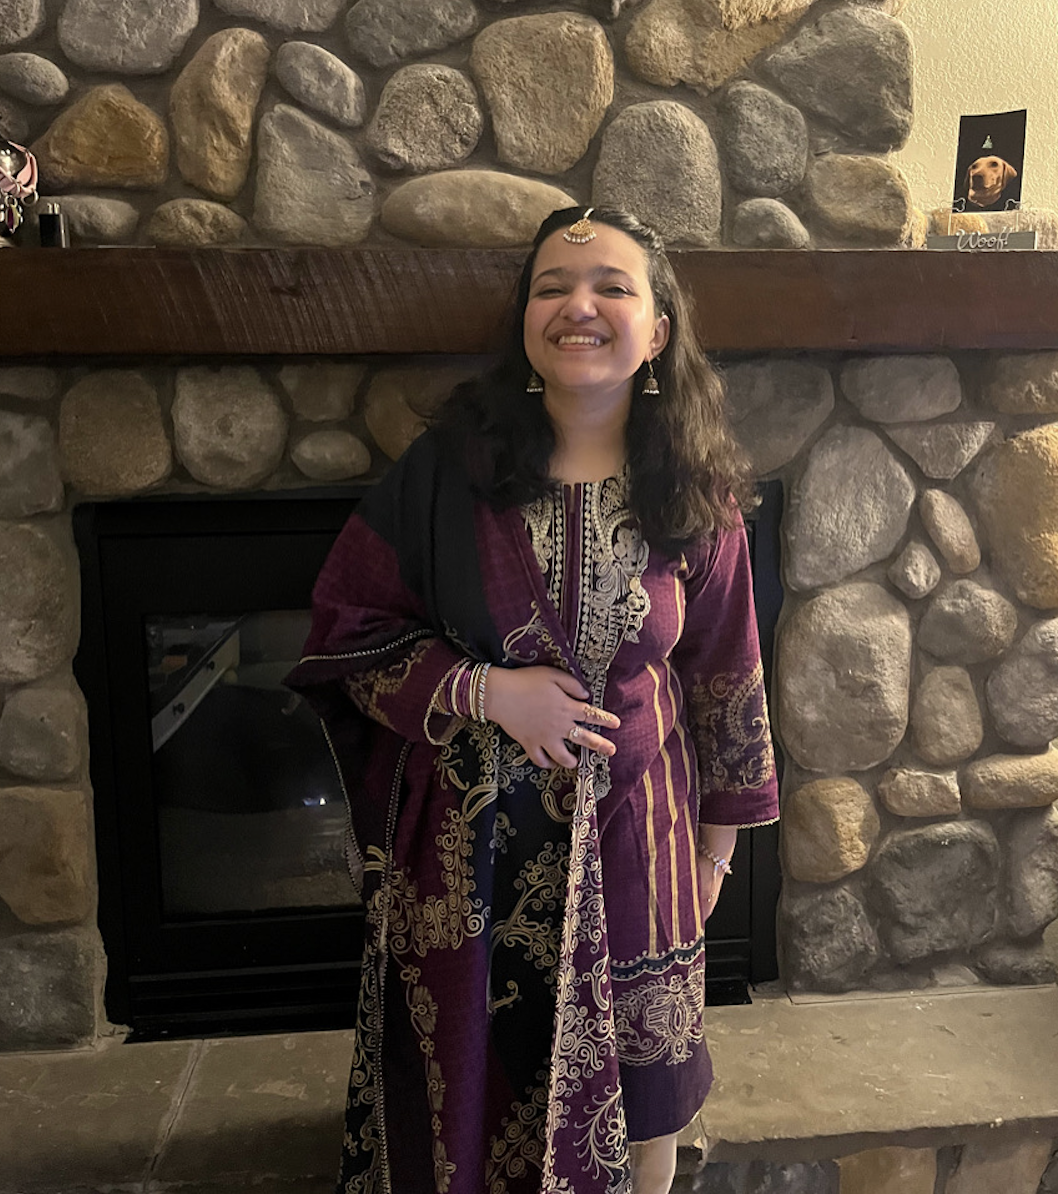 Student Posing In Front Of Fireplace In Traditional Clothing